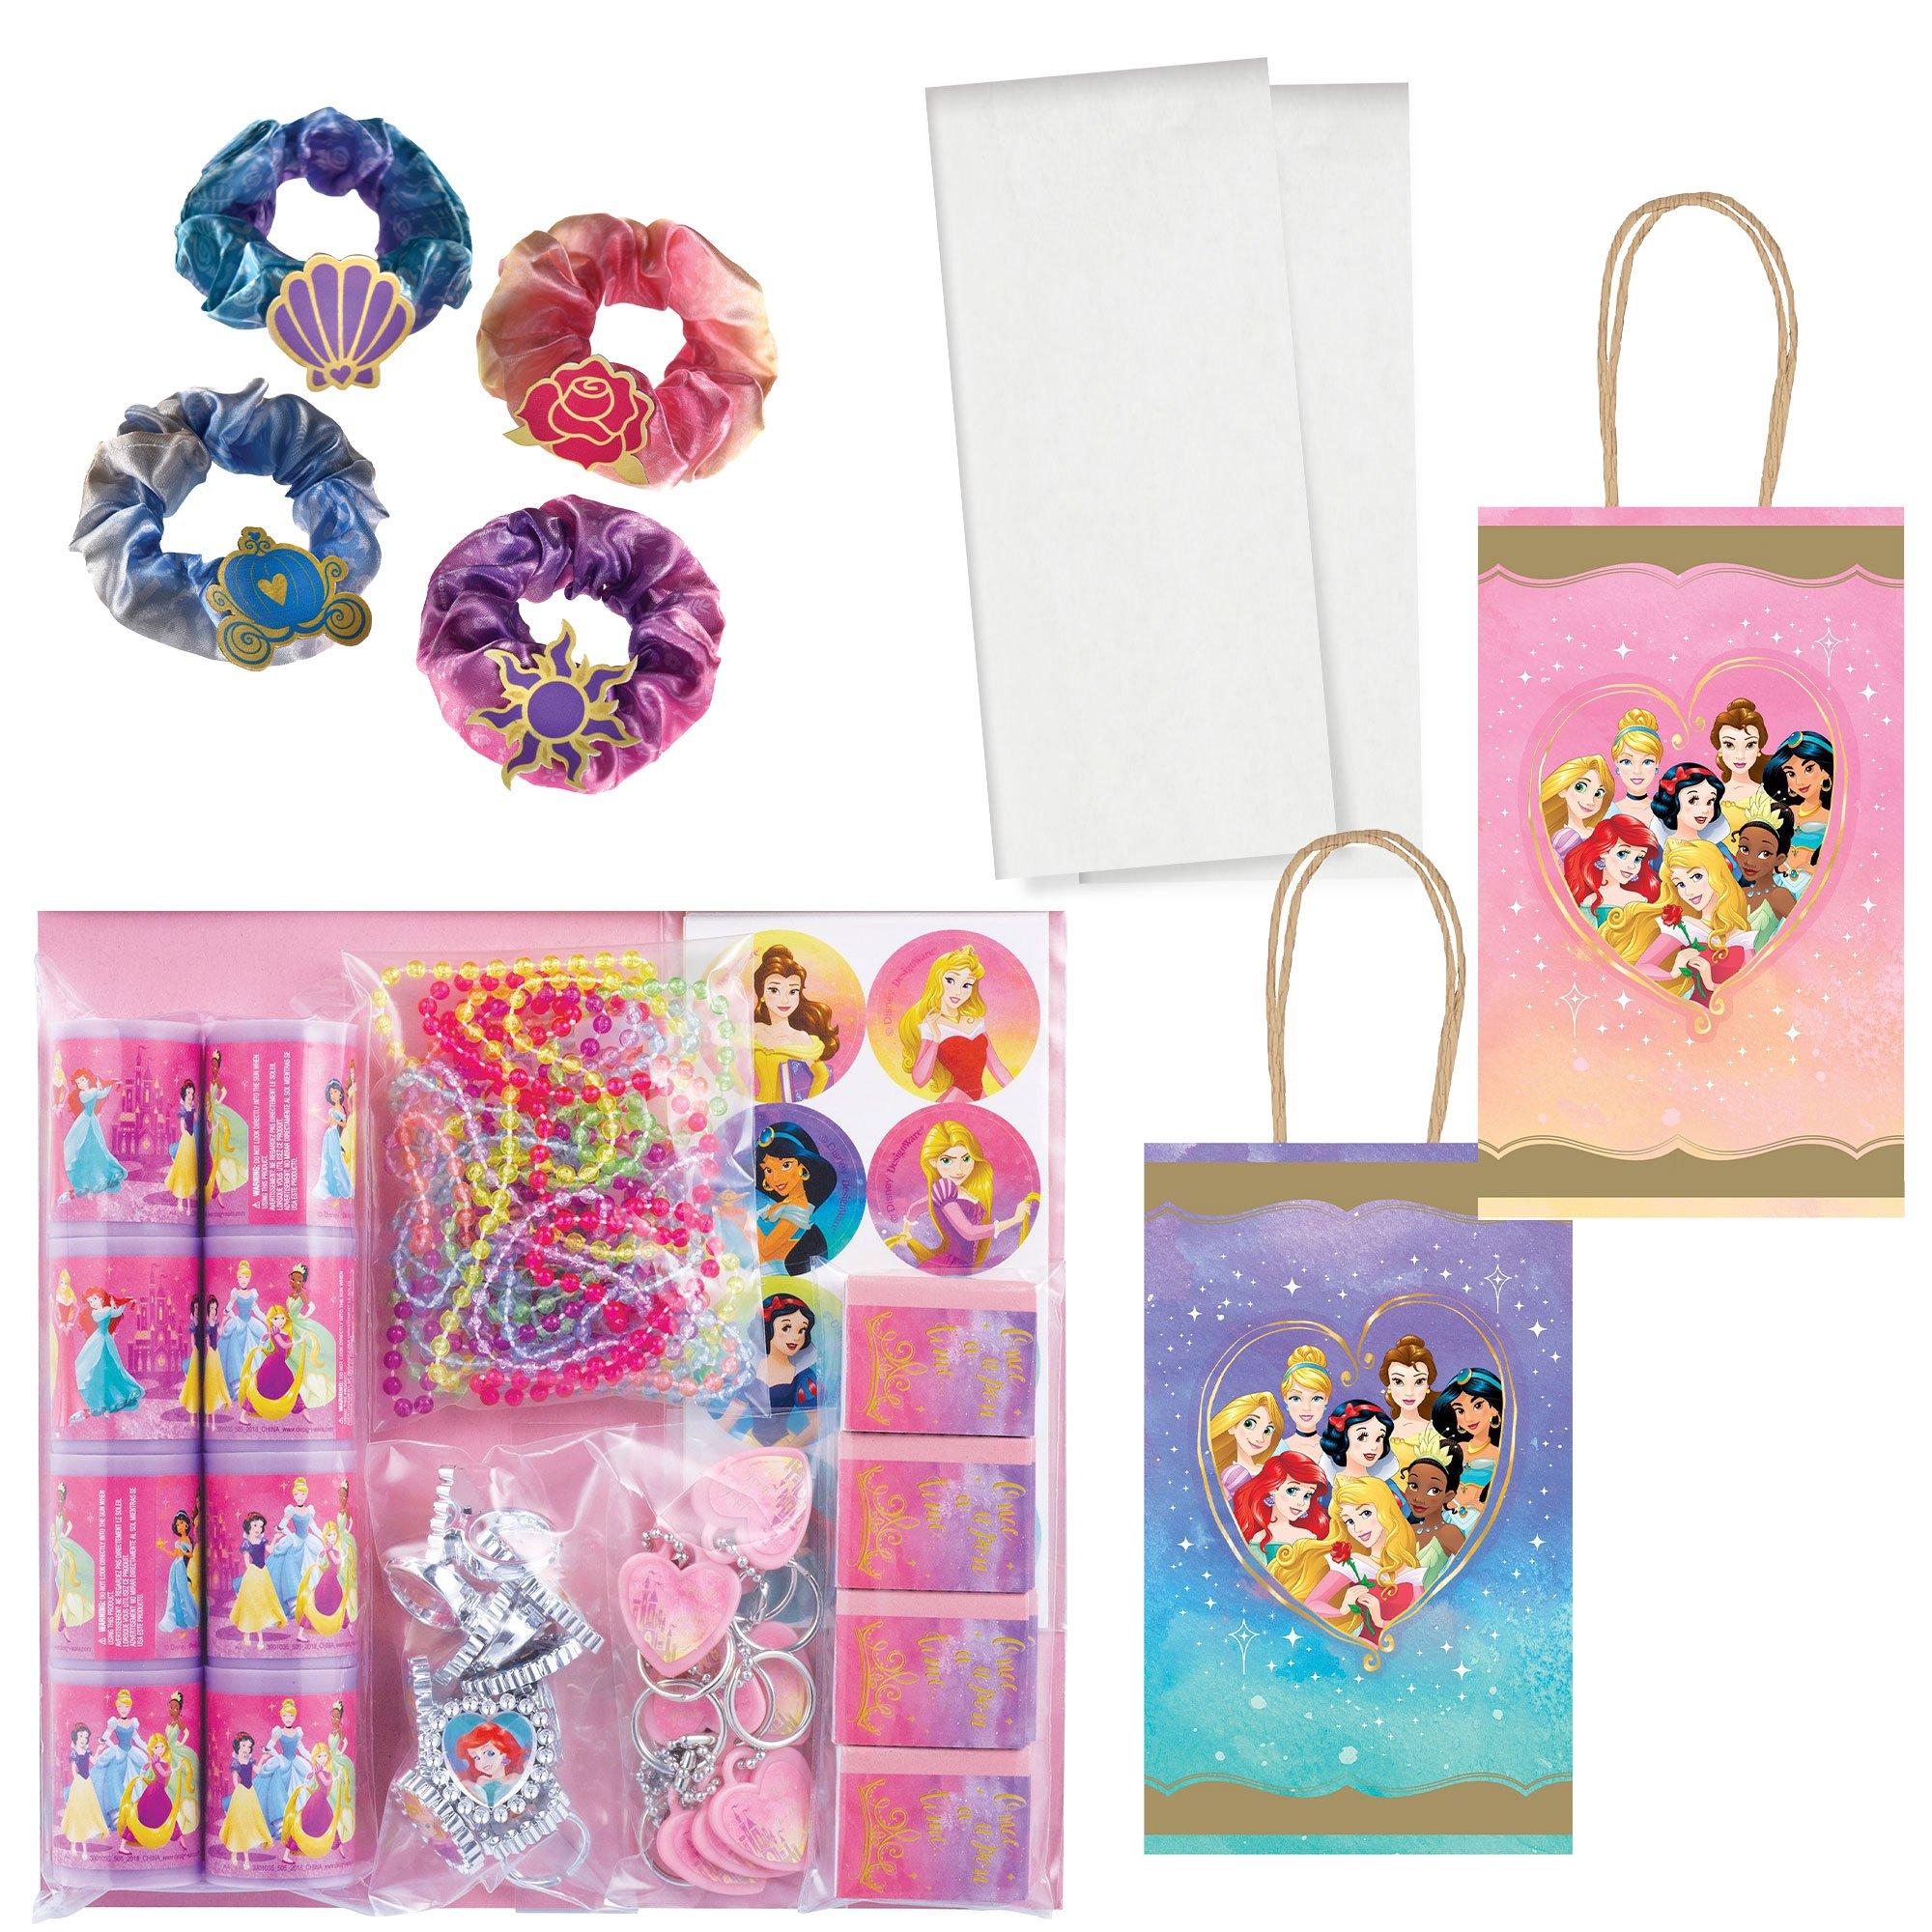  Party Favor Bags for Princess Birthday Party Supplies